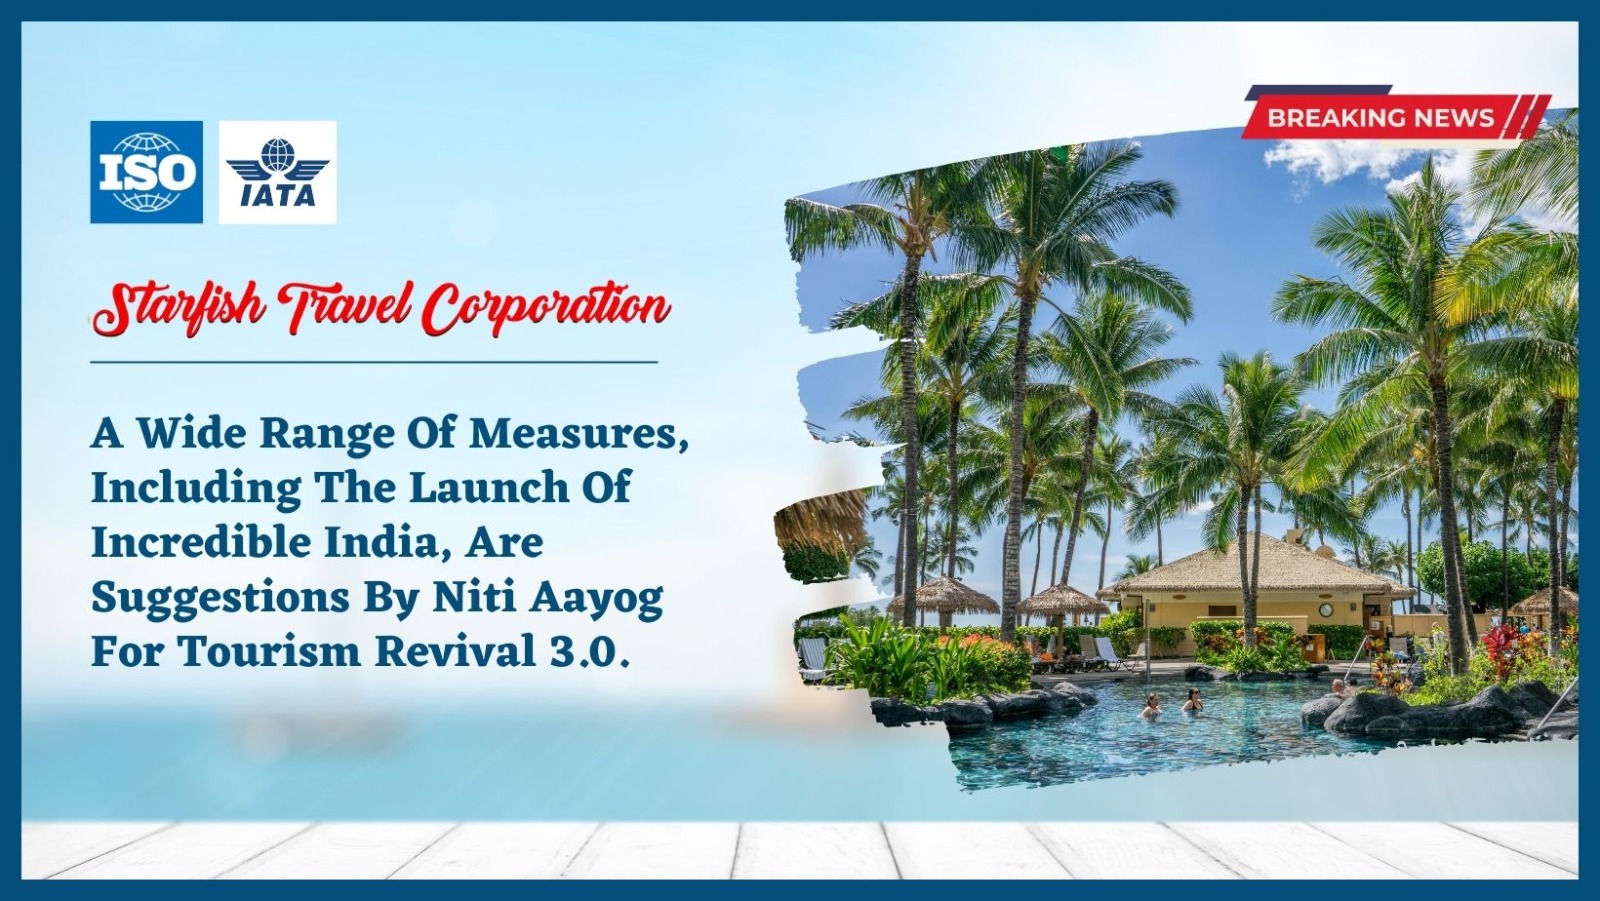 You are currently viewing A Wide Range Of Measures, Including The Launch Of Incredible India, Are Suggestions By Niti Aayog For Tourism Revival 3.0